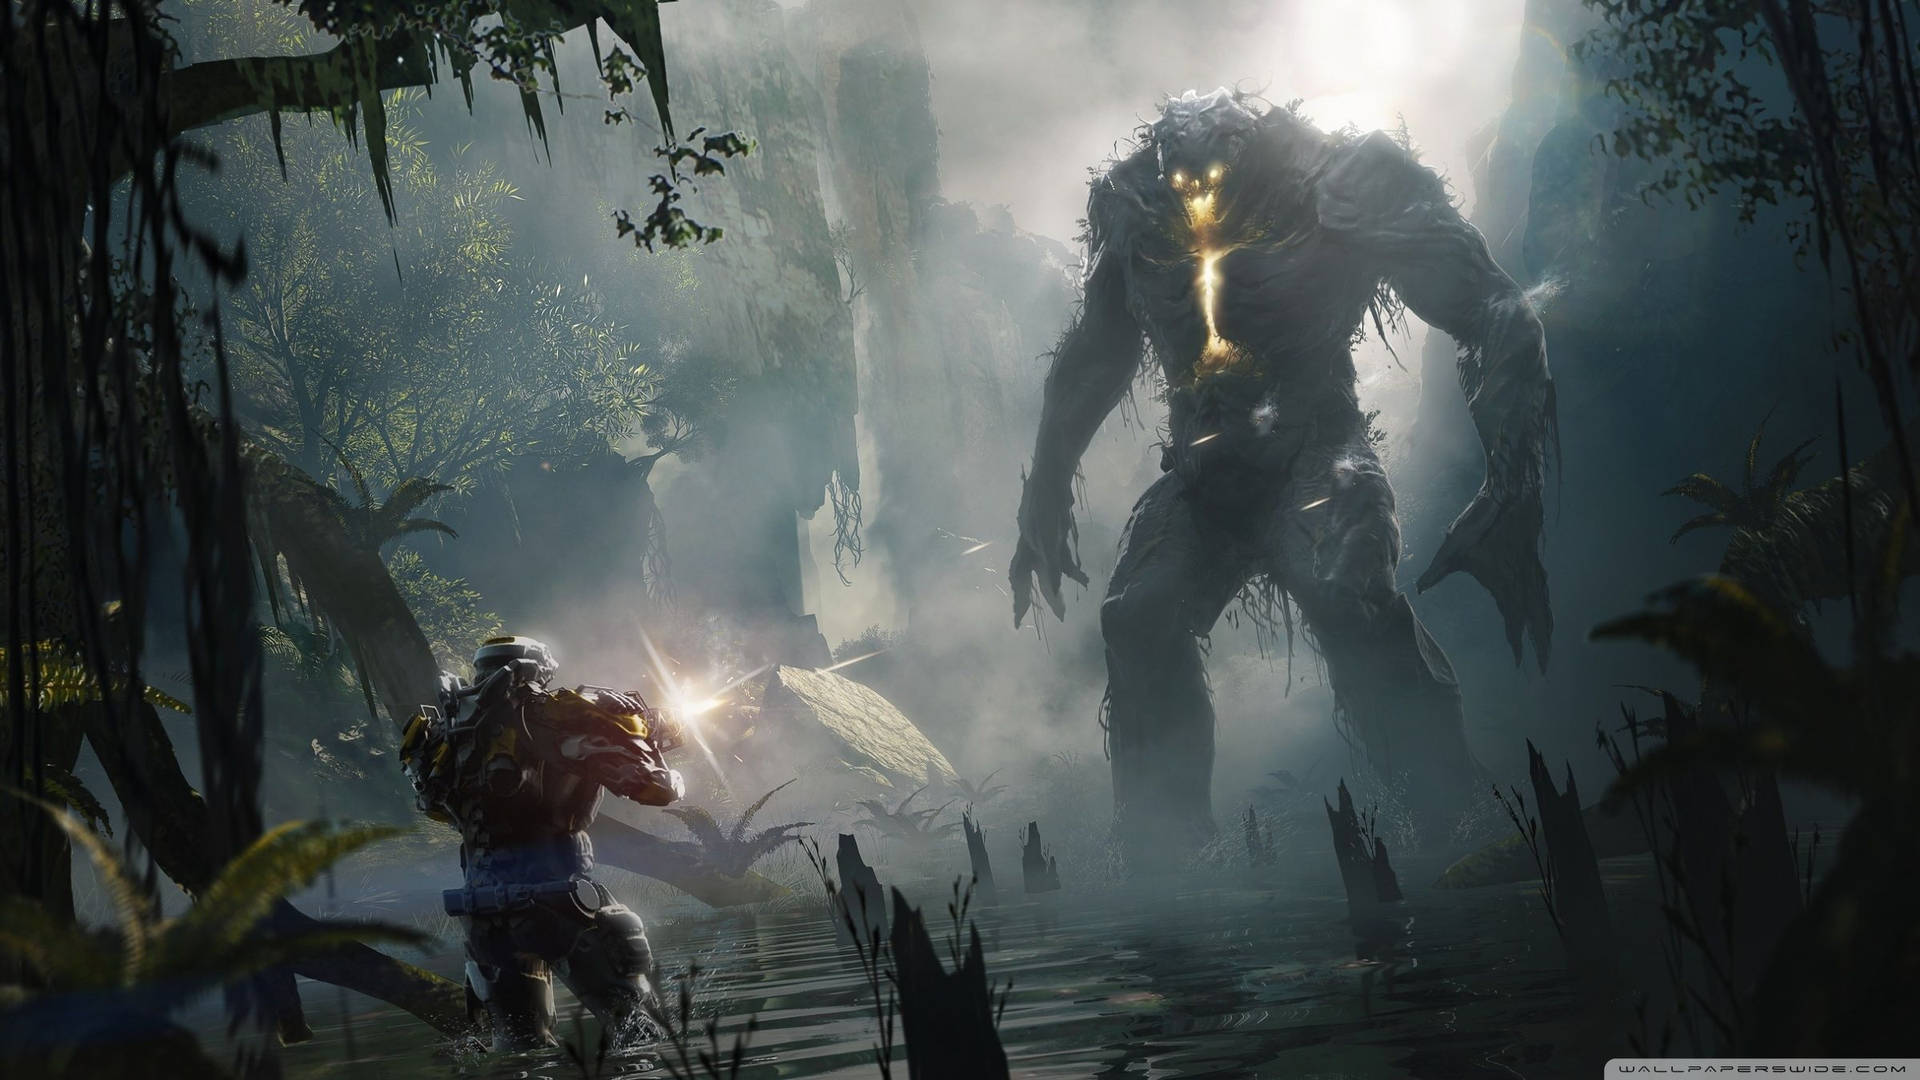 Face off between Javelin and enemy in the epic sci-fi game, Anthem. Wallpaper